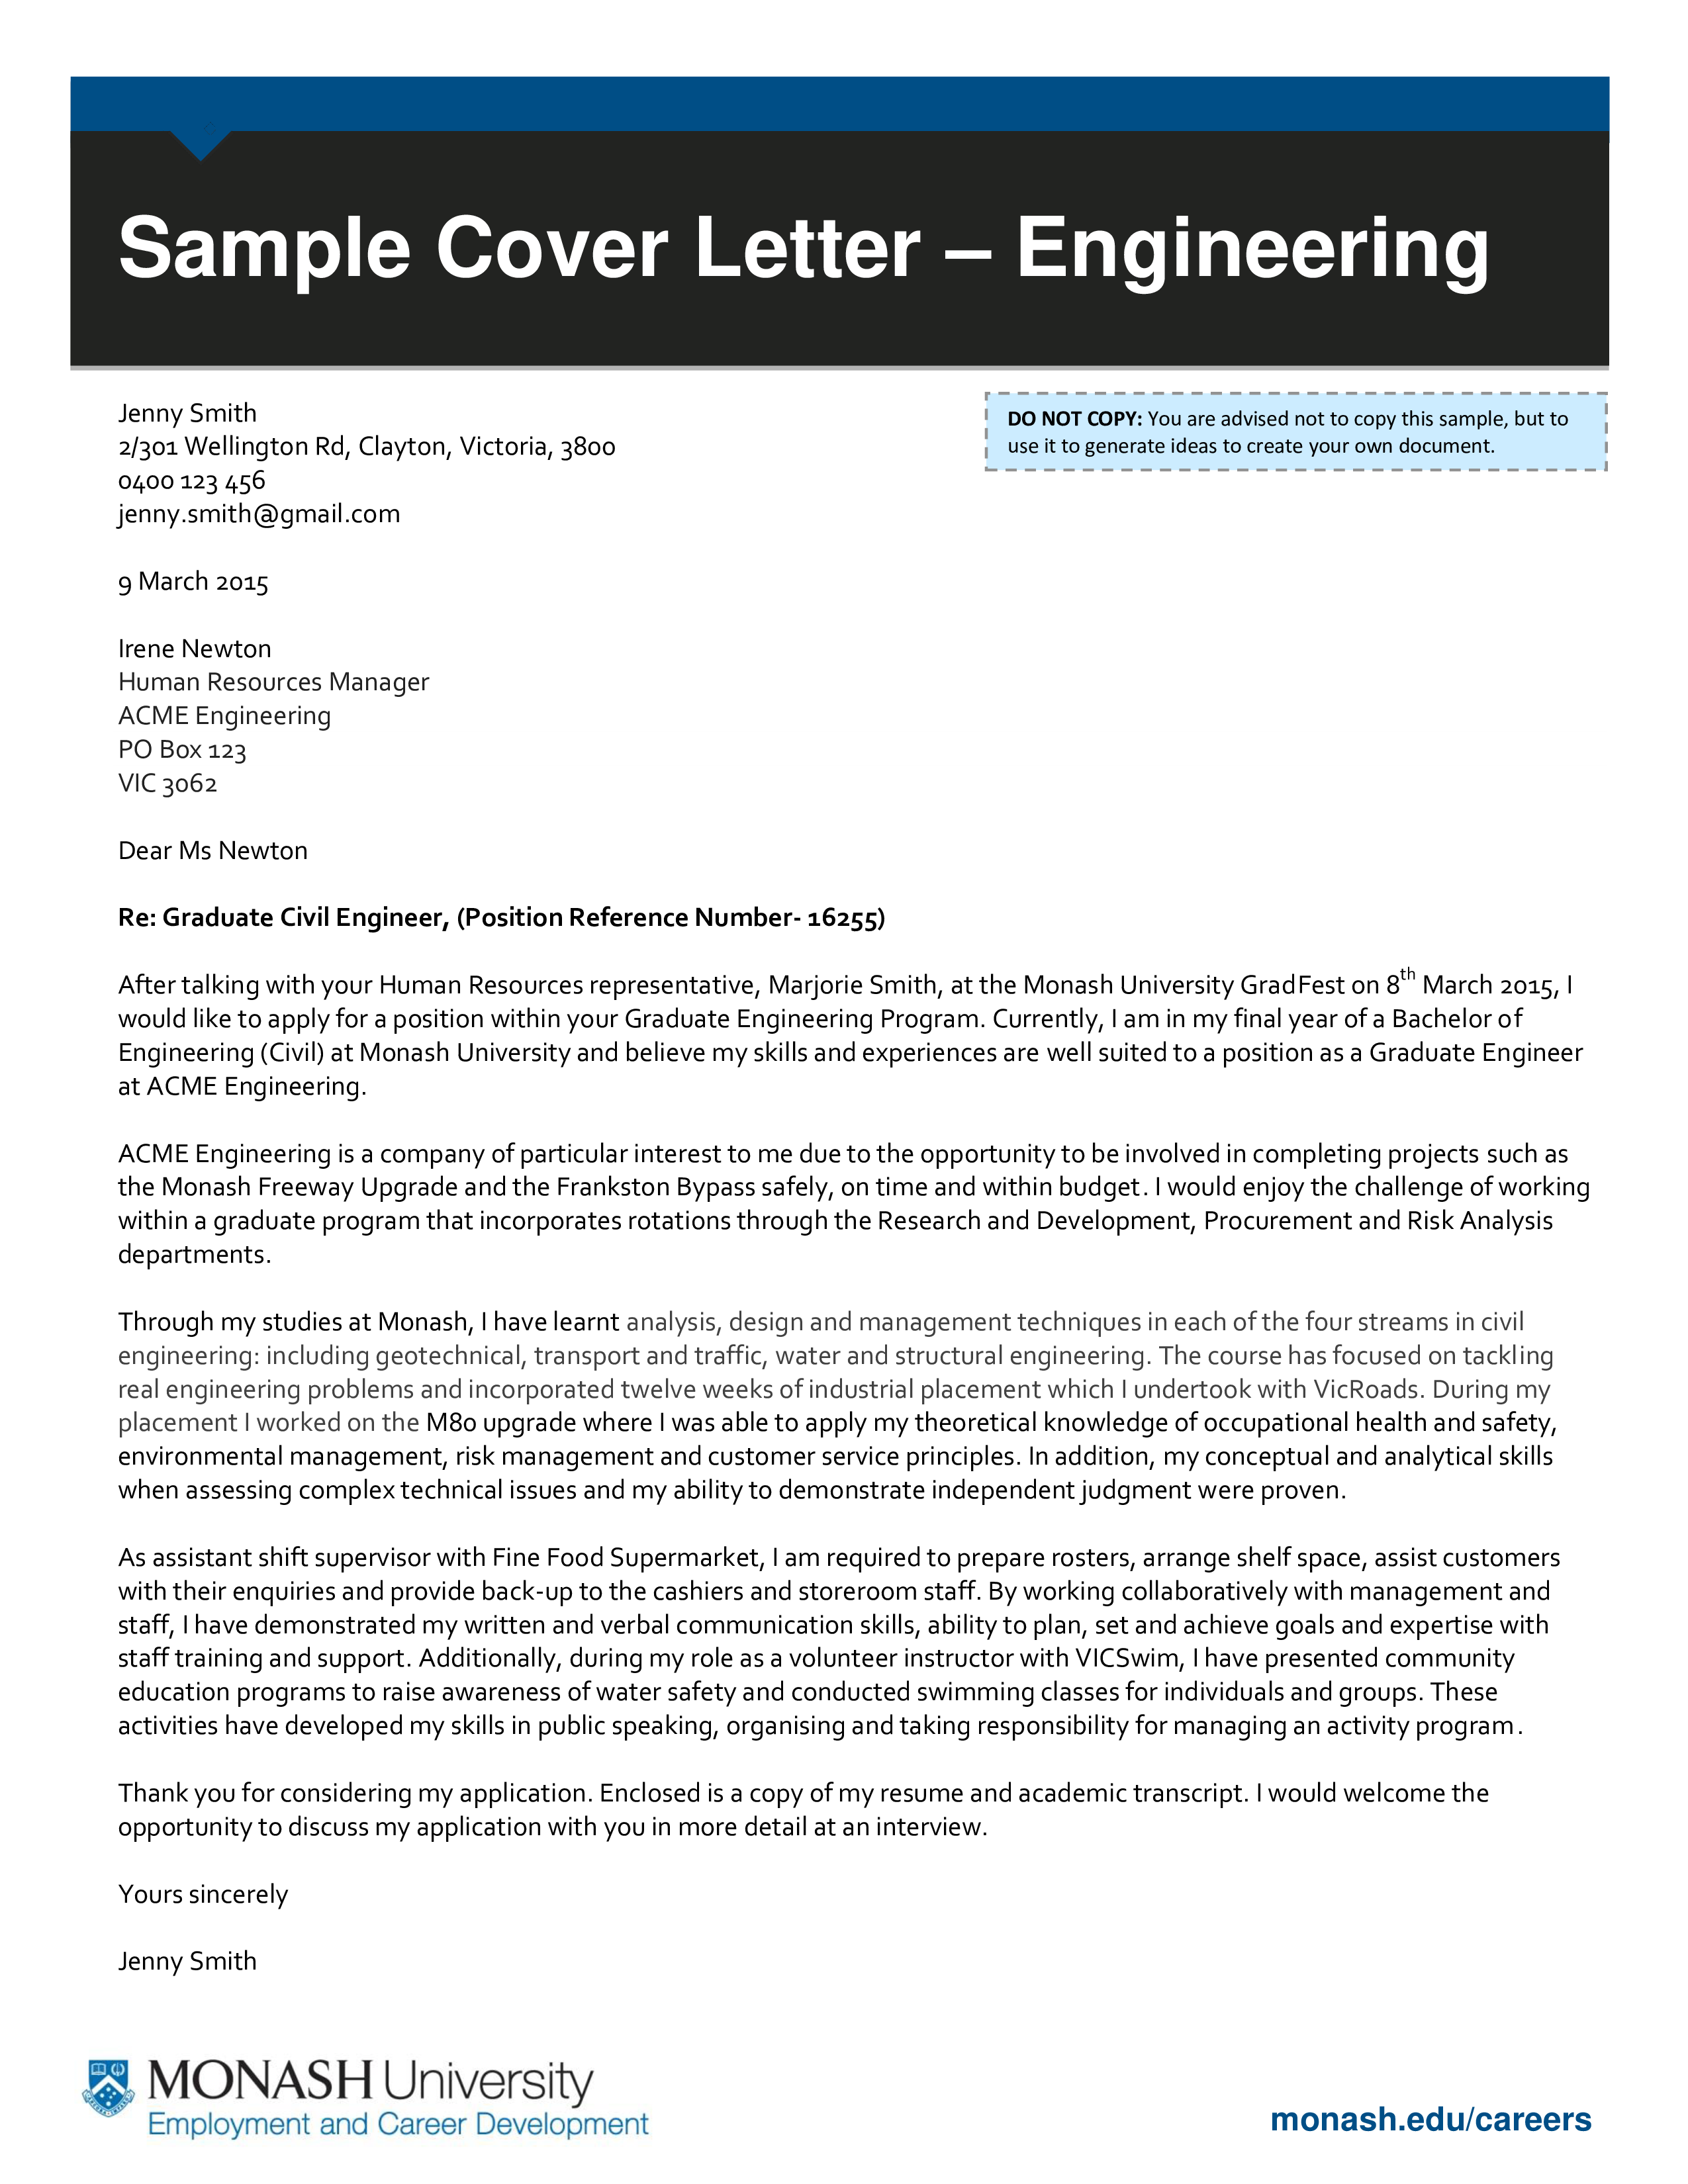 Engineering Resume Cover Letter Sample | Templates at ...